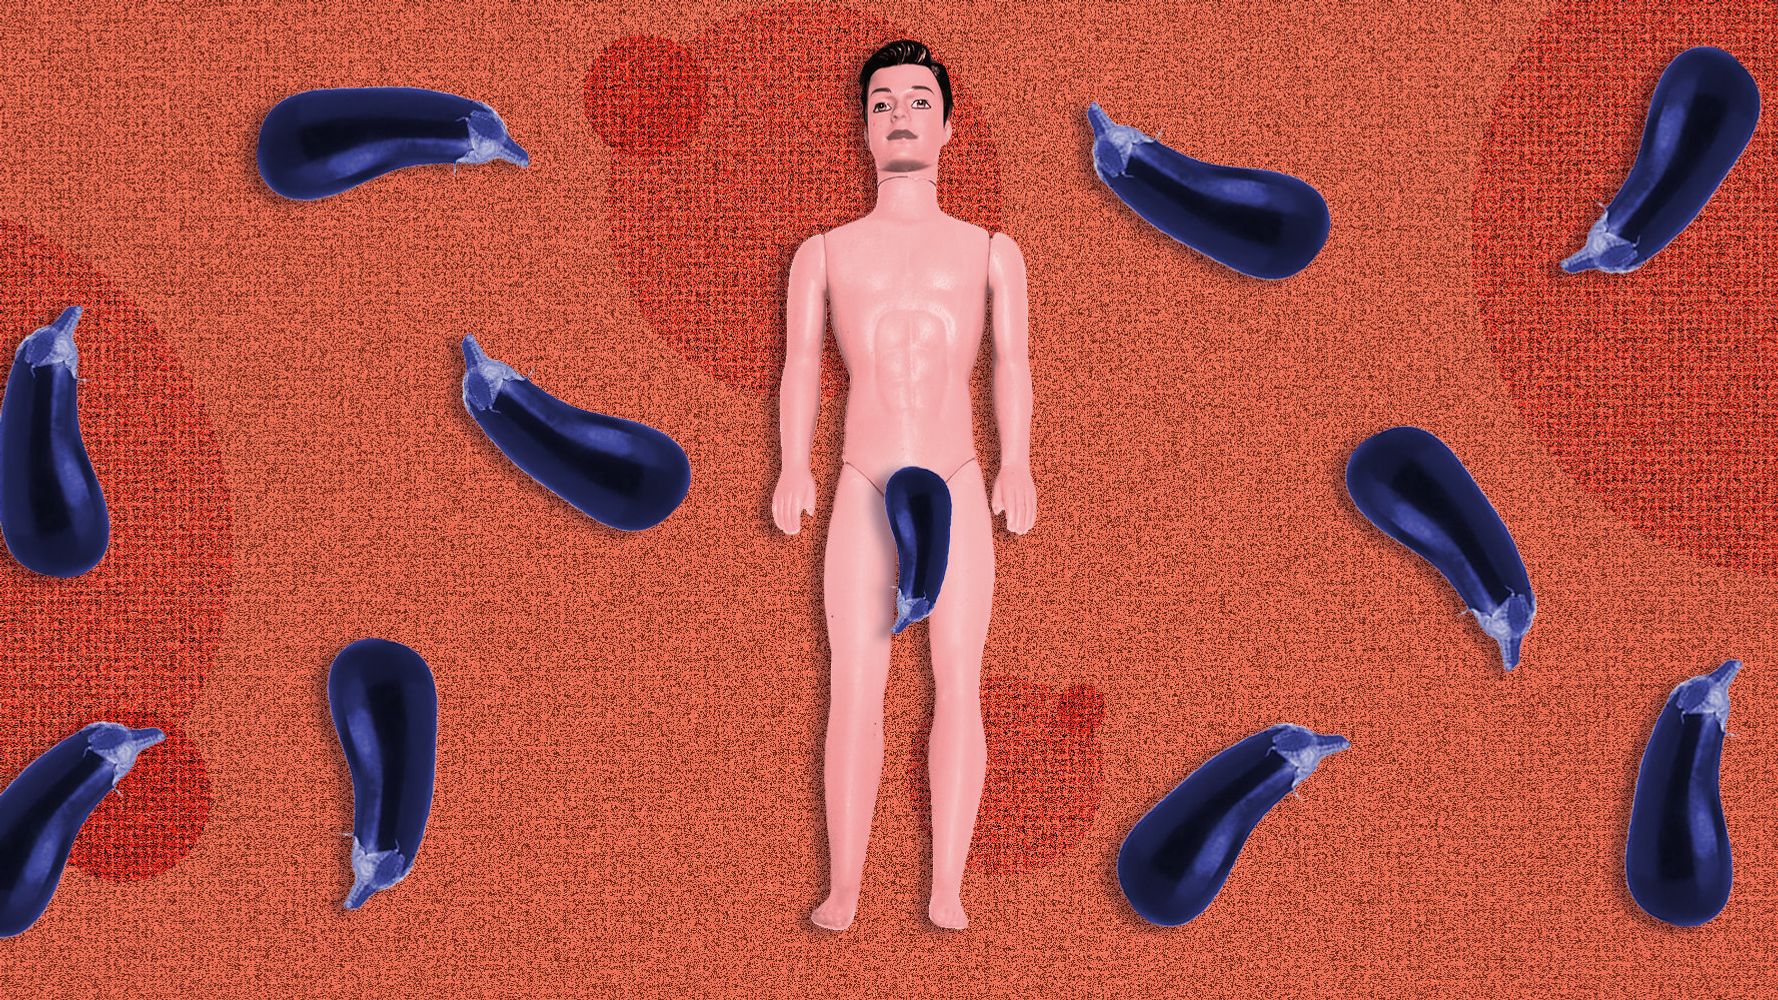 Mature Porn Bent Dick - 8 Myths And Beliefs About The Penis, Analyzed By Sex Experts | HuffPost Life